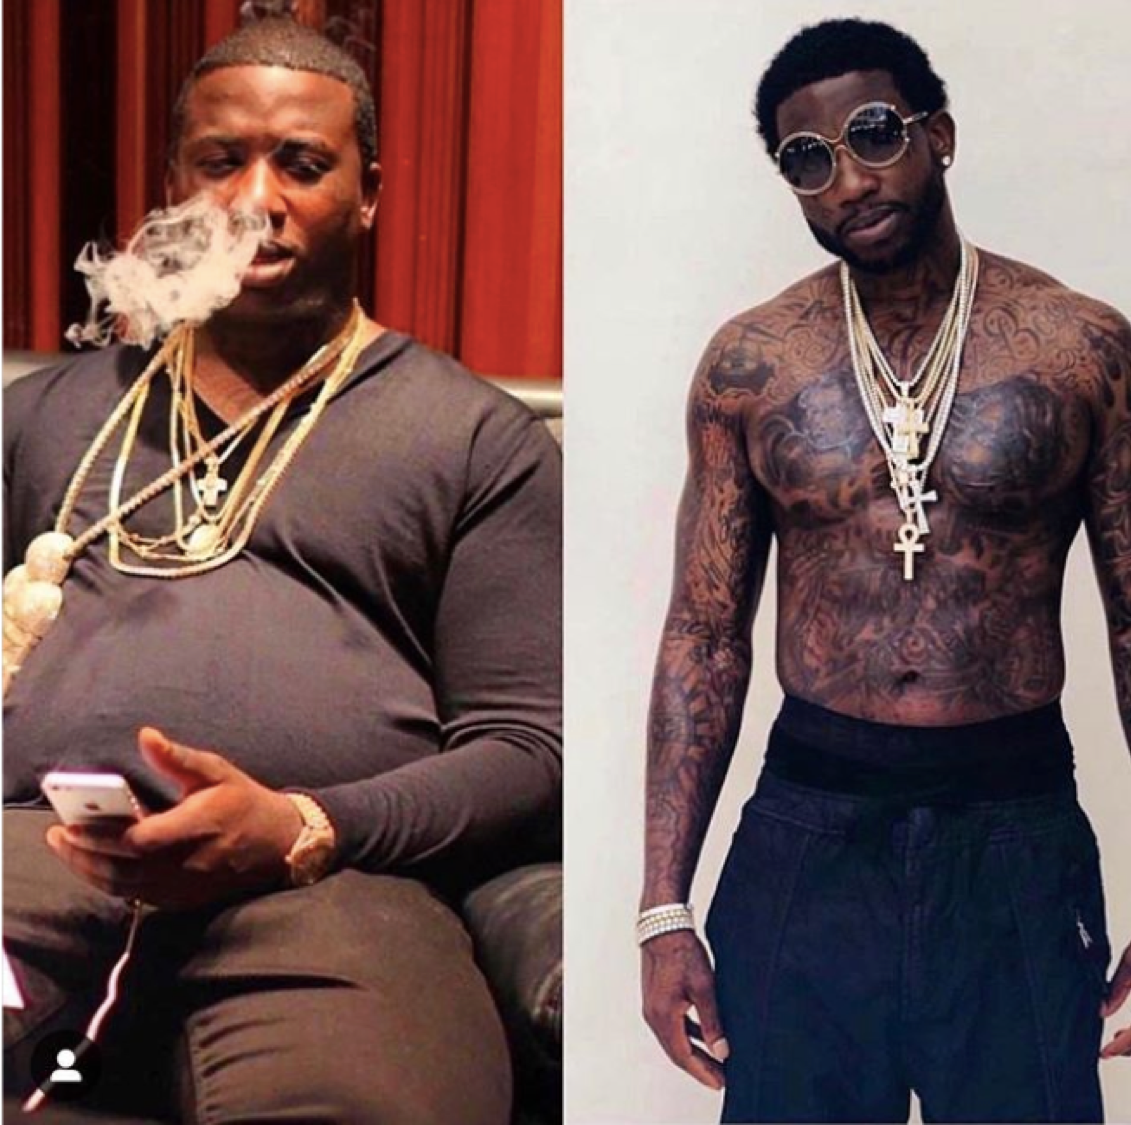 Gucci Mane, Buff, Sober, Out of the Pen and Ready to Flow - The